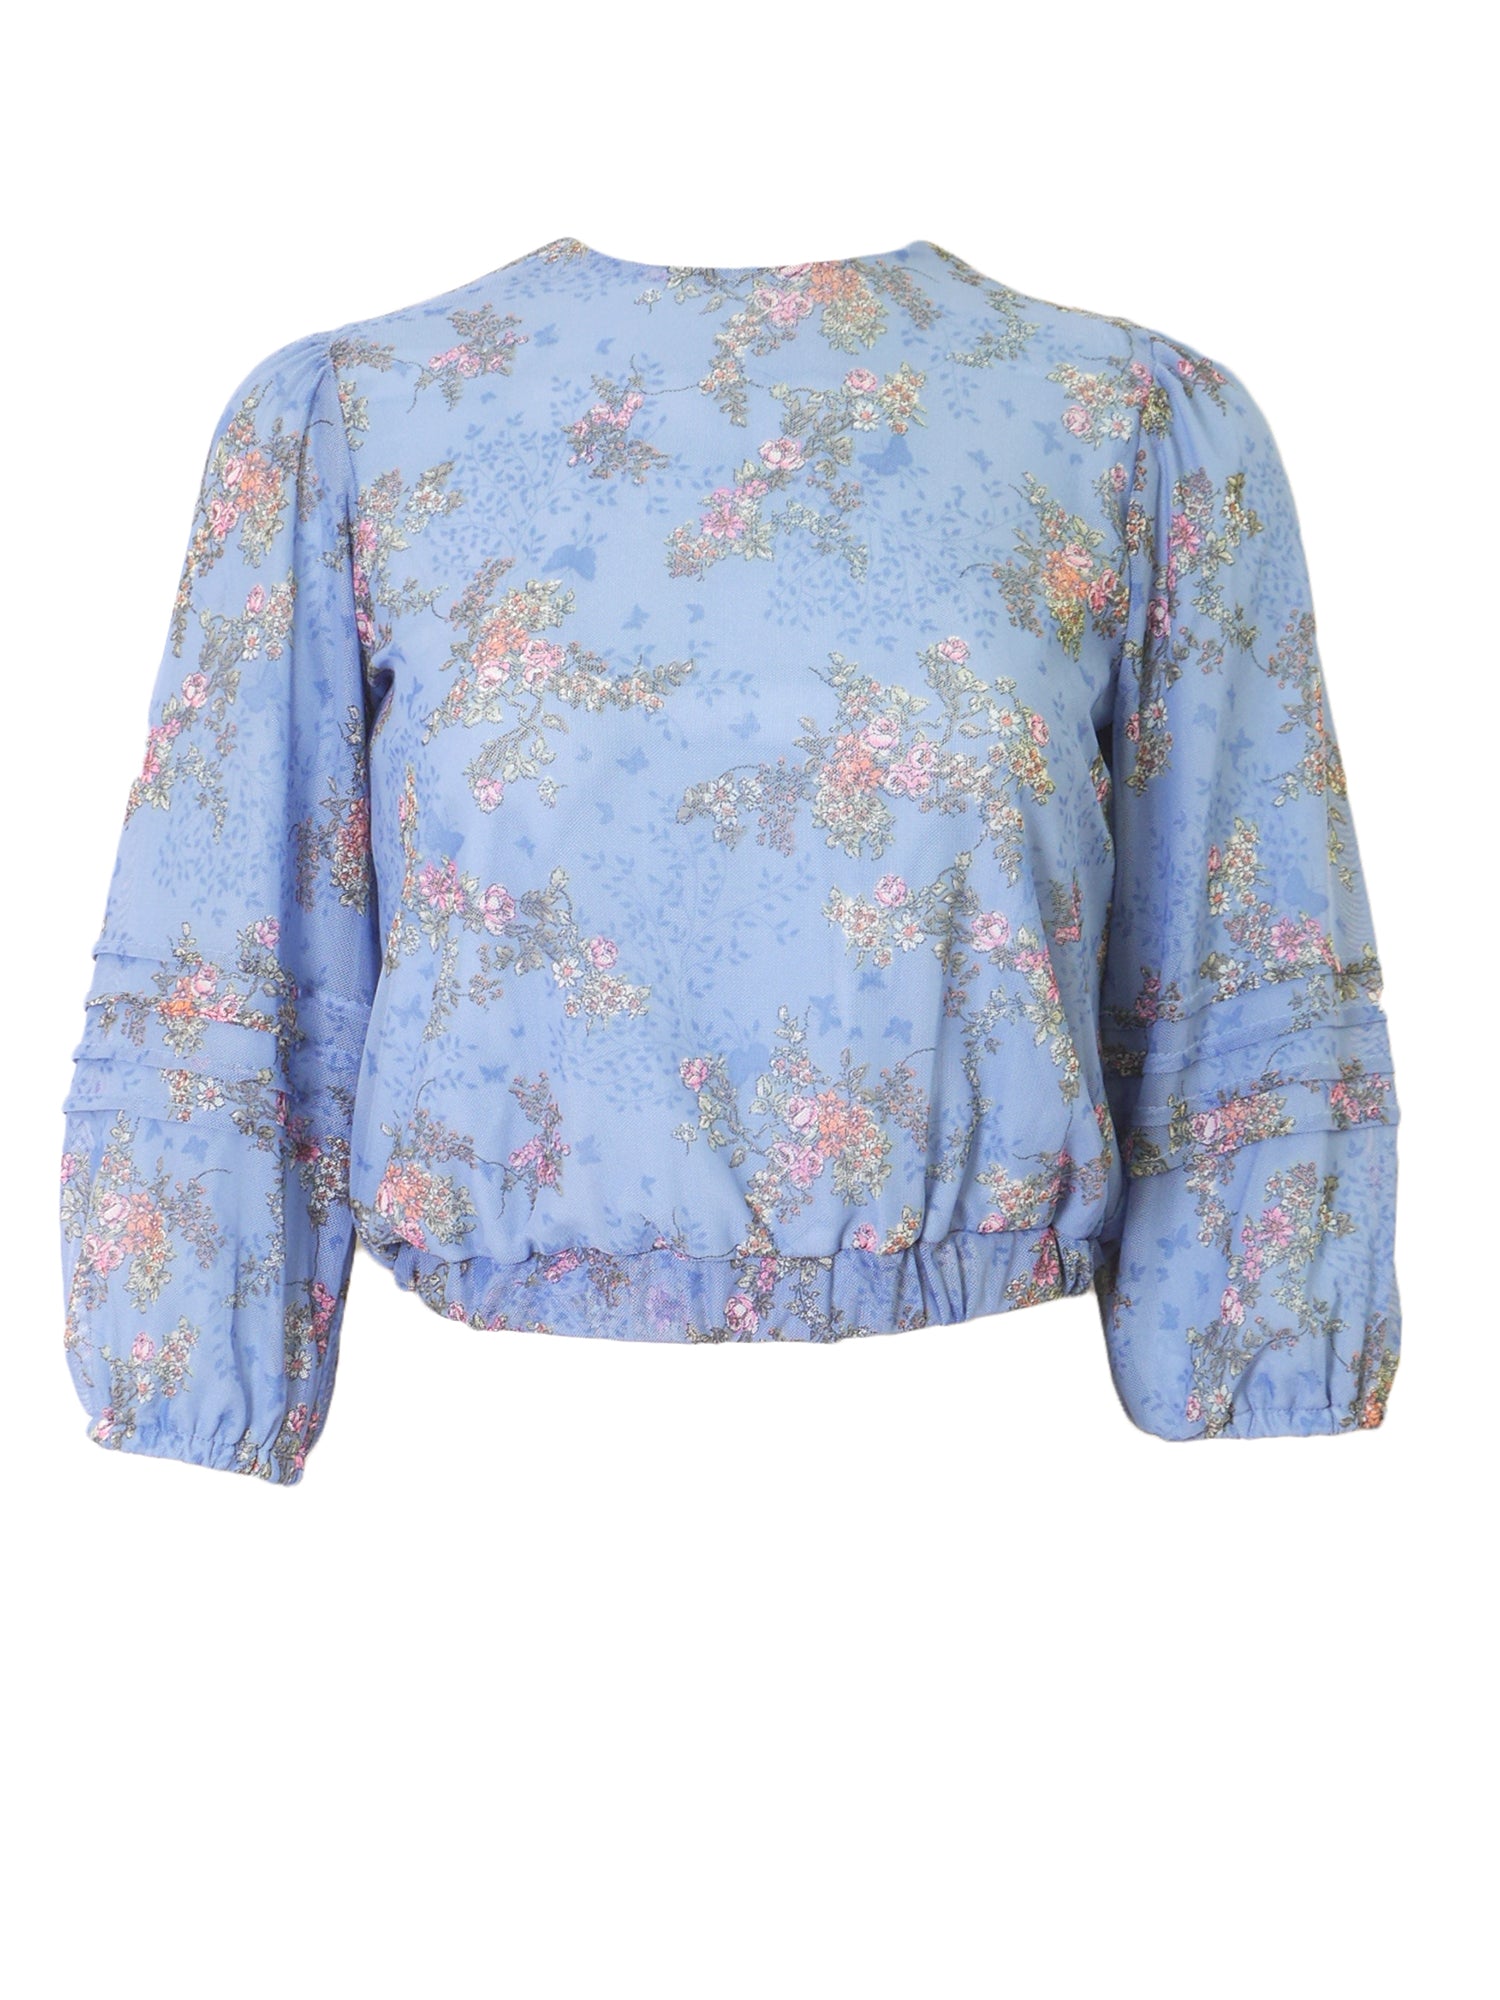 Miss Issippi Mesh Floral Cropped Top - Tops